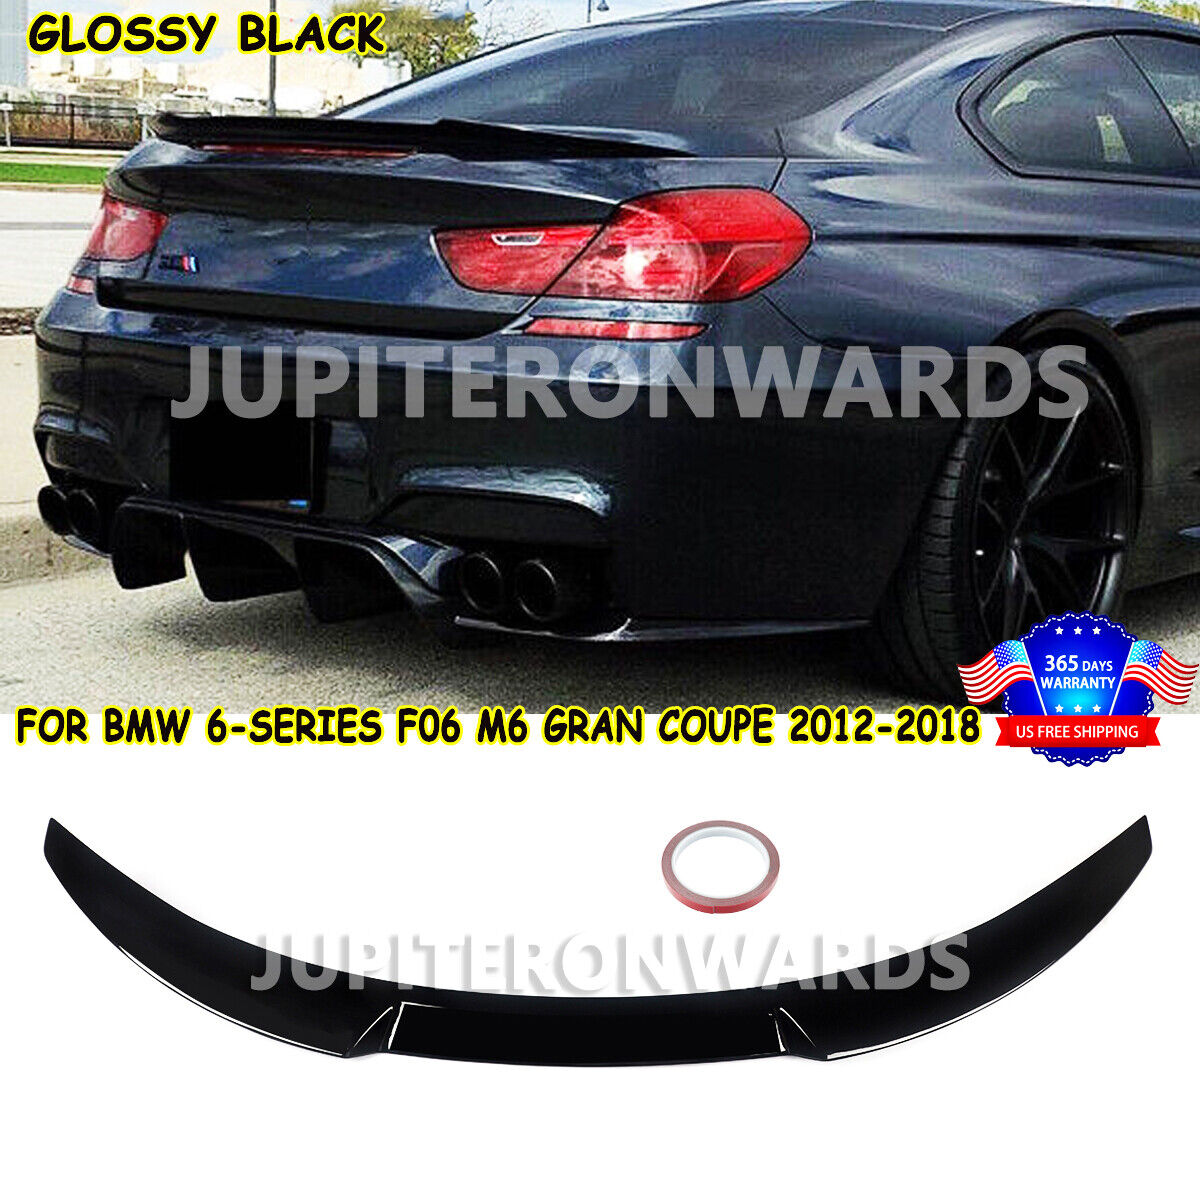 M4 Duckbill Style Rear Spoiler Wing For BMW 6-Series F06 M6 Gran Coupe 2012-2018